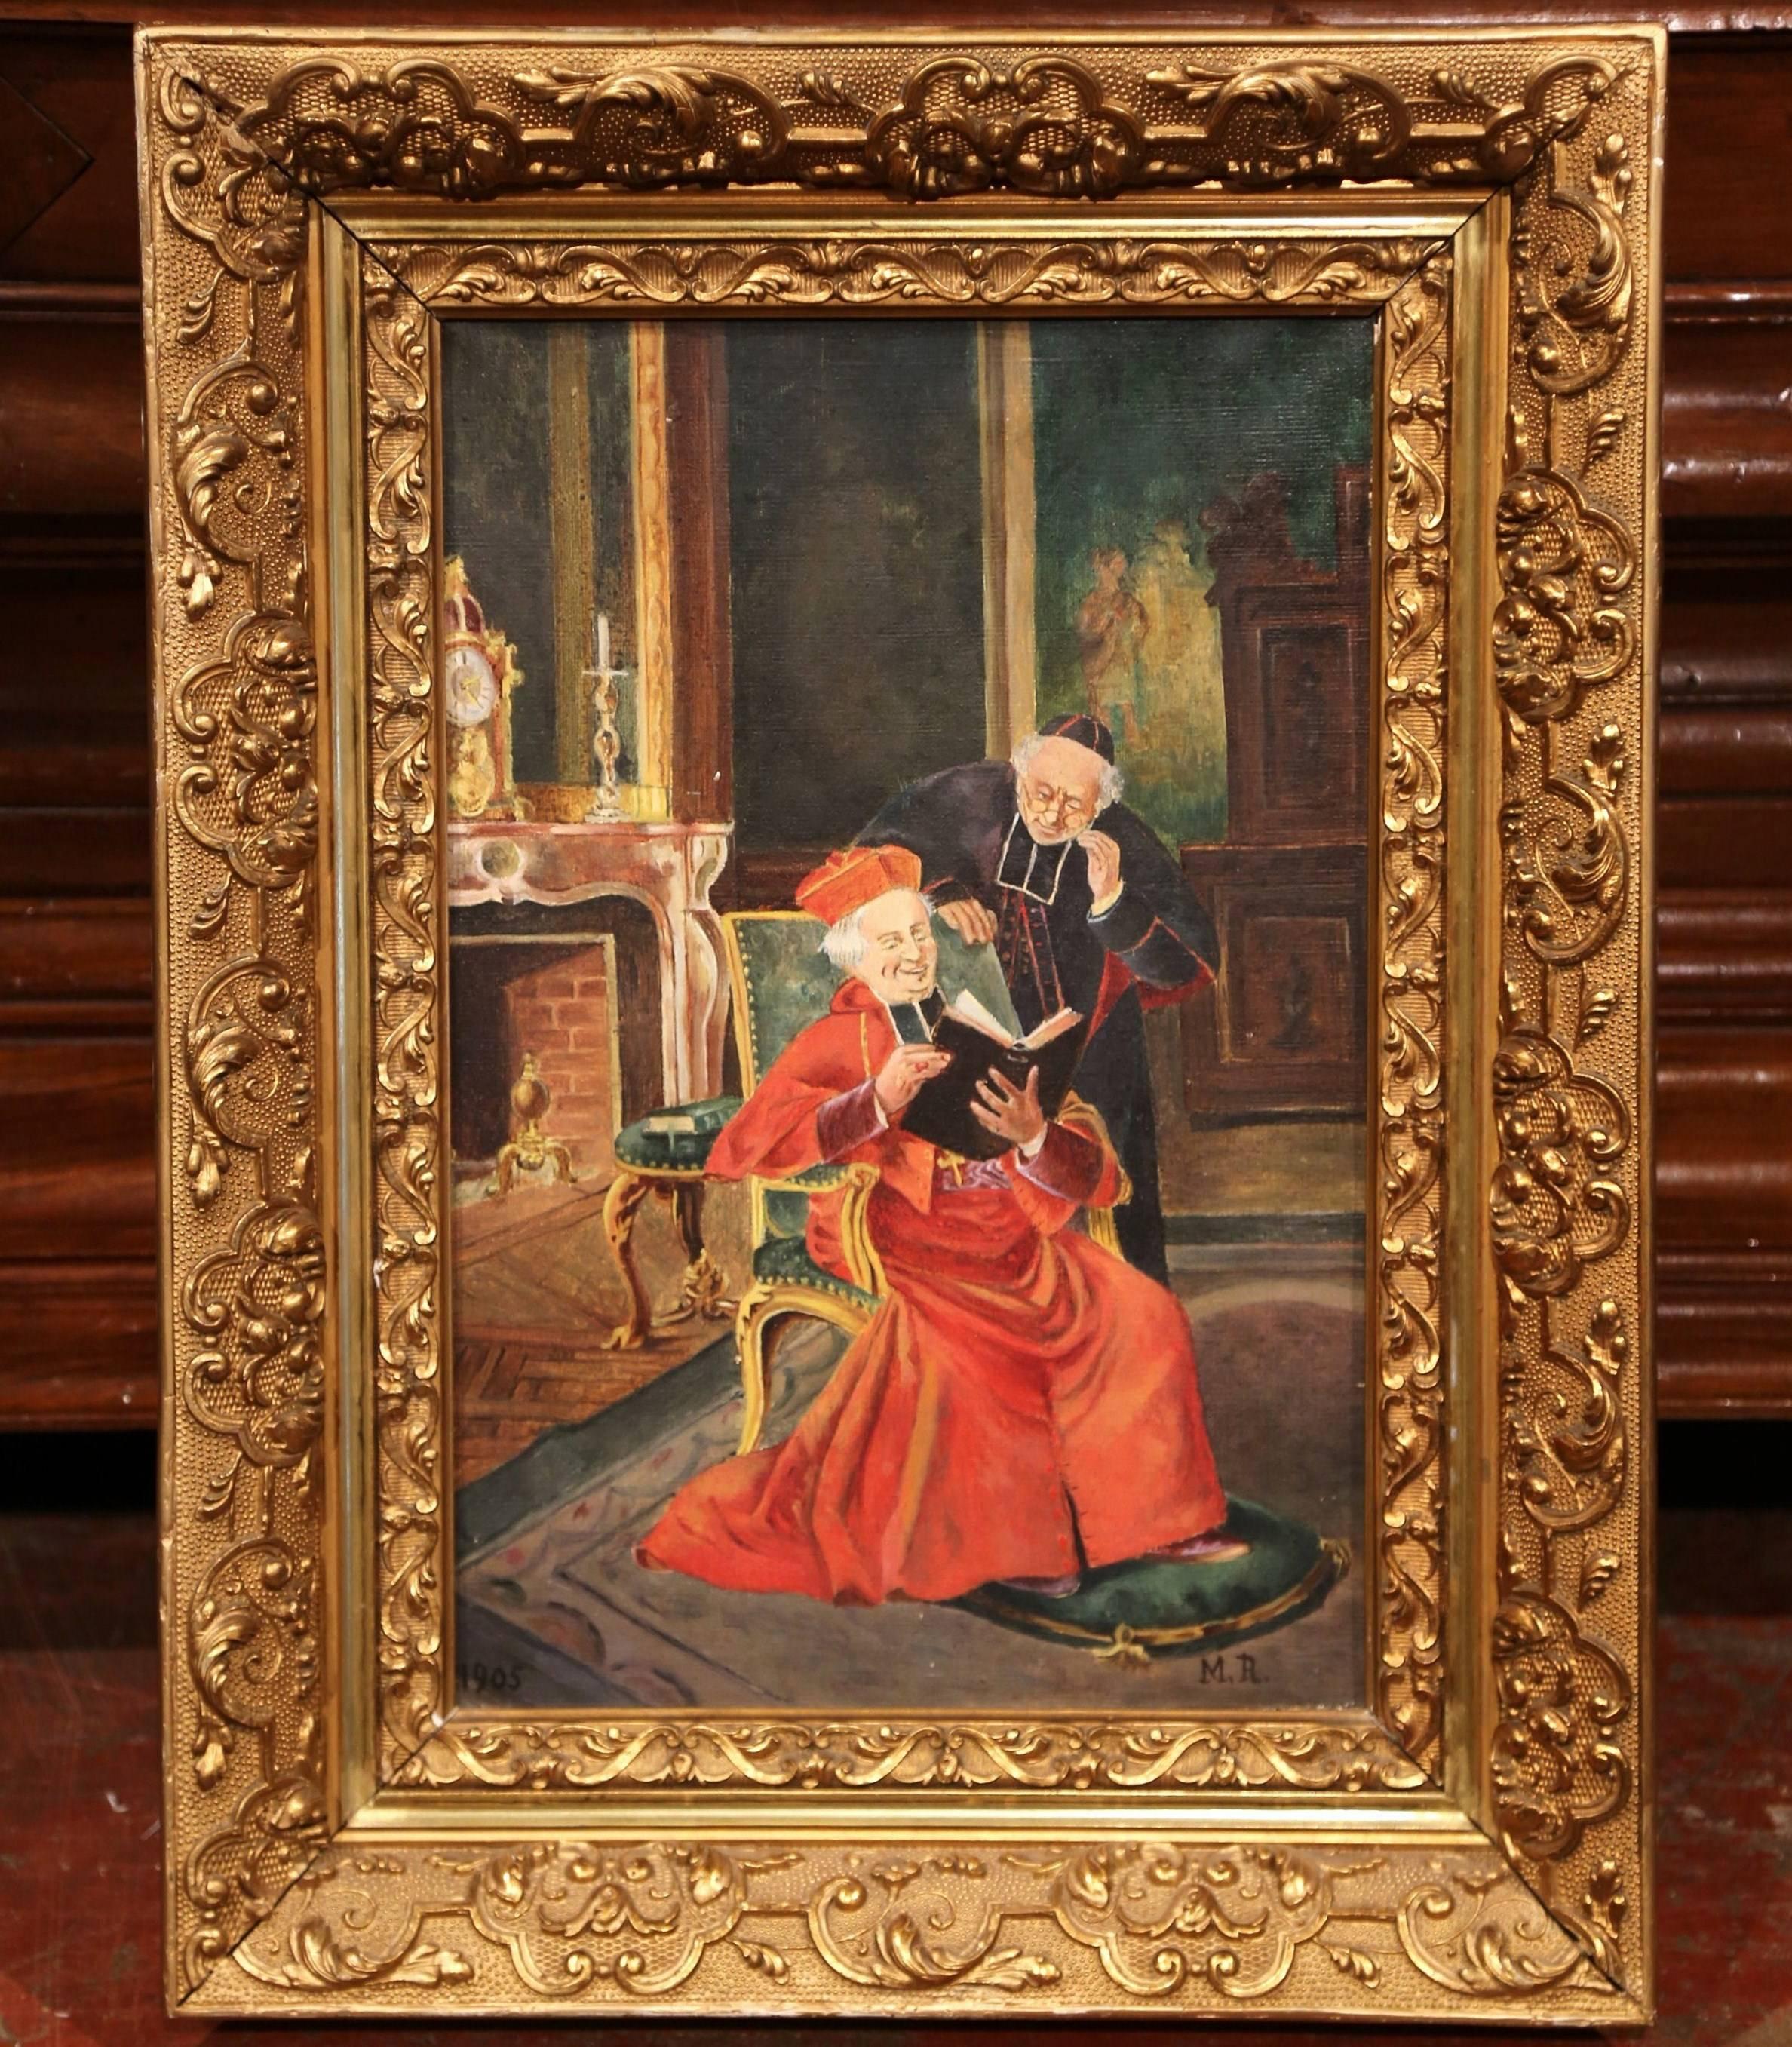 Beautiful antique oil on canvas in carved gilt wood frame; crafted in France, the painting depicts a religious interior scene with a seated Cardinal reading while a standing priest is looking on. The art work is signed on the bottom right M. R. and